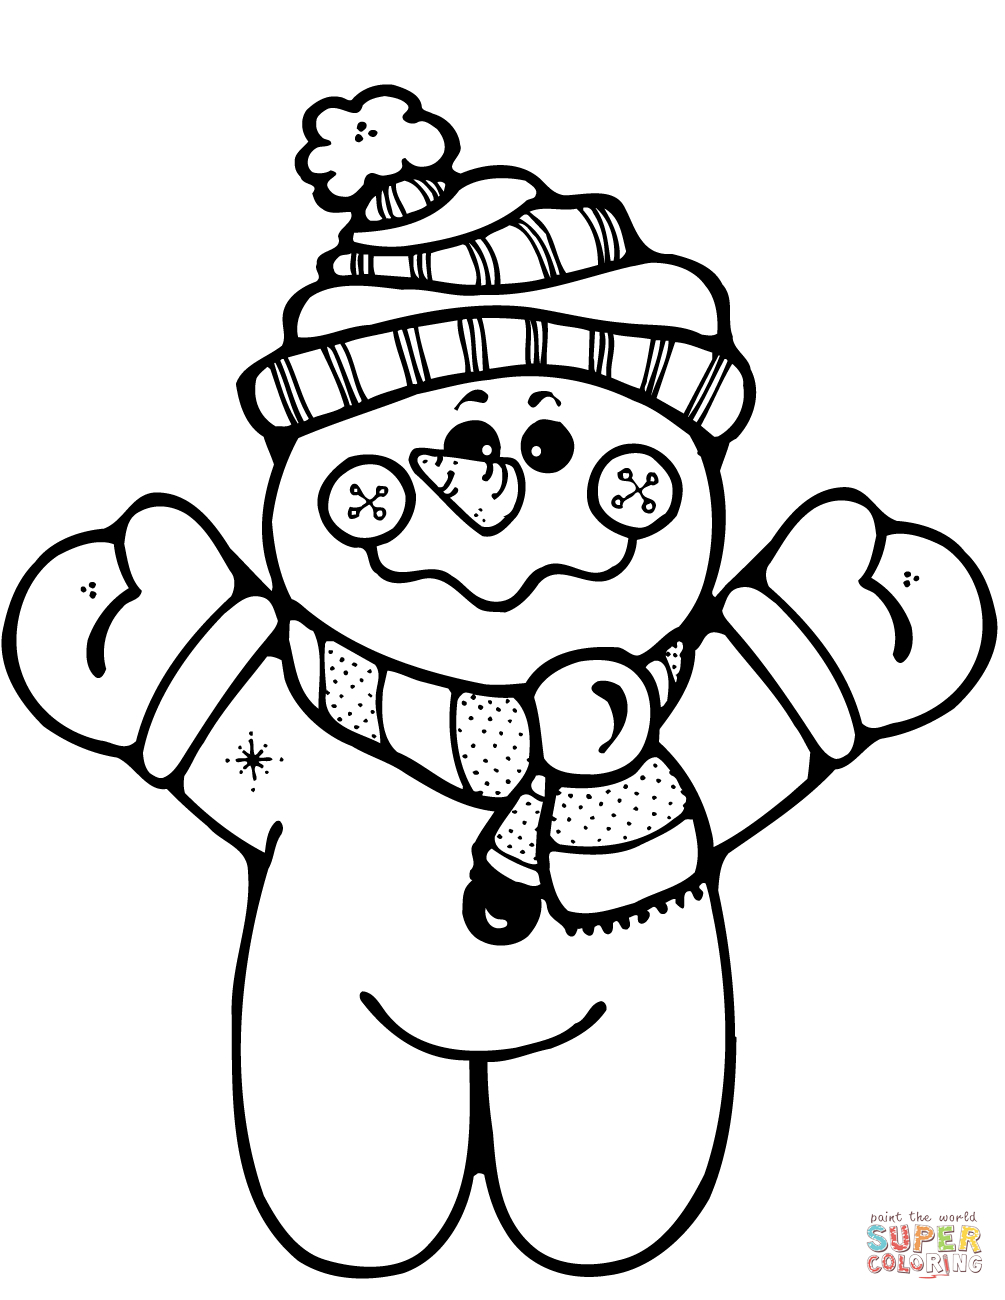 Coloring Pages Of Snowmen Happy Snowman Coloring Page Free Printable Coloring Pages